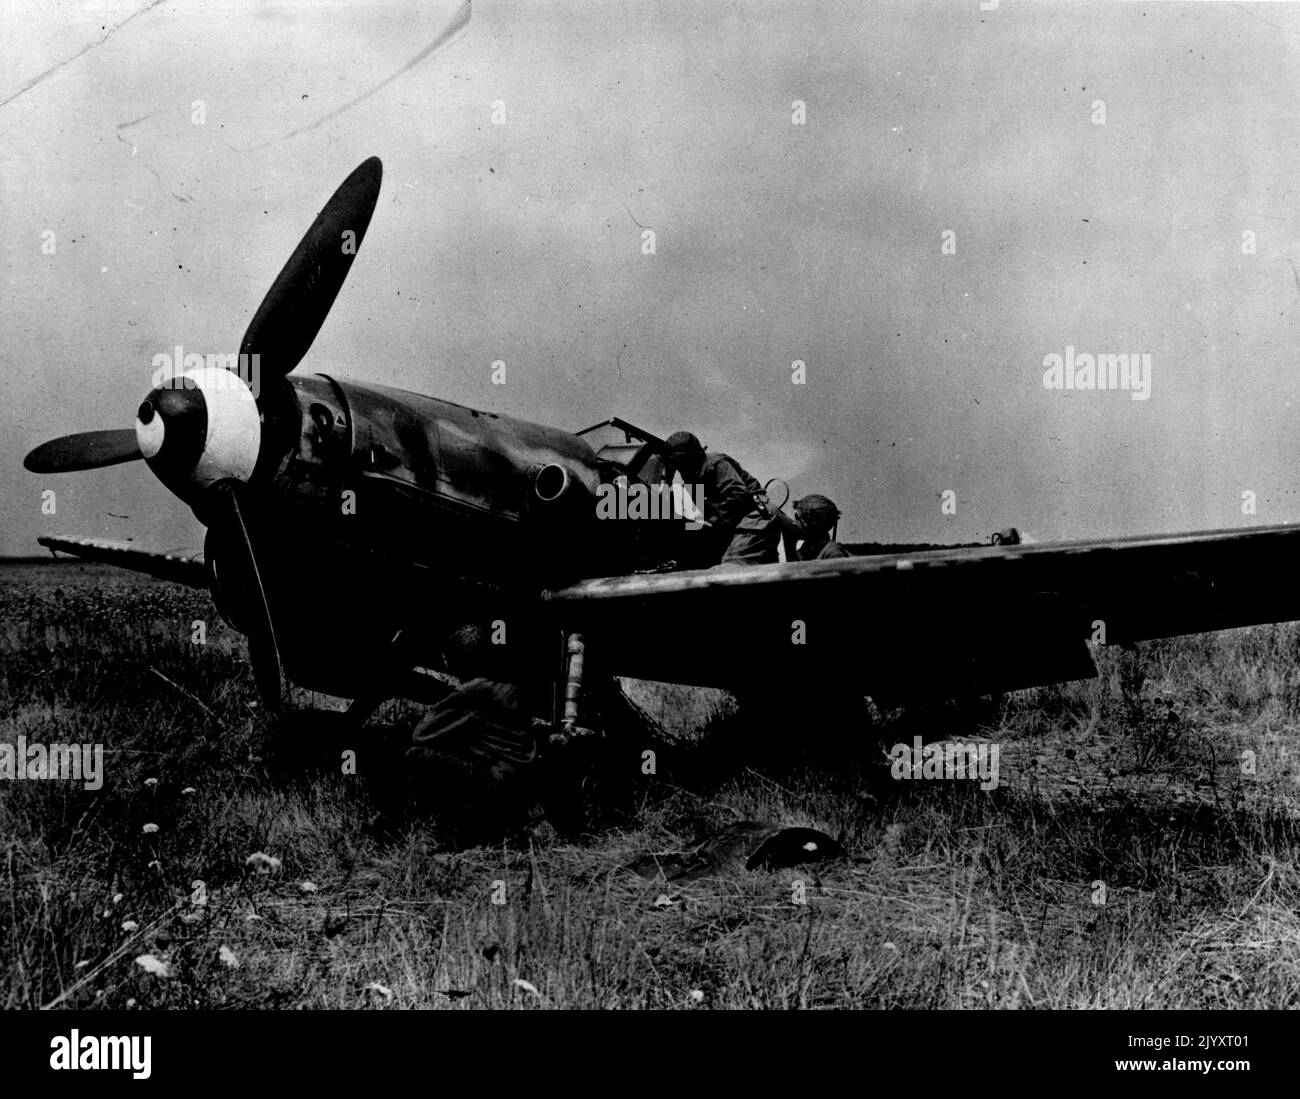 Fighter Plans Abandoned By Retreating Nazis -- American soldiers examine a German FW-190 fighter plane left behind by Germans fleeing from the Nogent-le-Roi sector in Franco. The American advance in this area was so overwhelming and swift that the Nazis had no time to take the plane with them. This picture has just been released by the consors. January 1, 1945. (Photo by U.S. Signal Corps Photo). Stock Photo